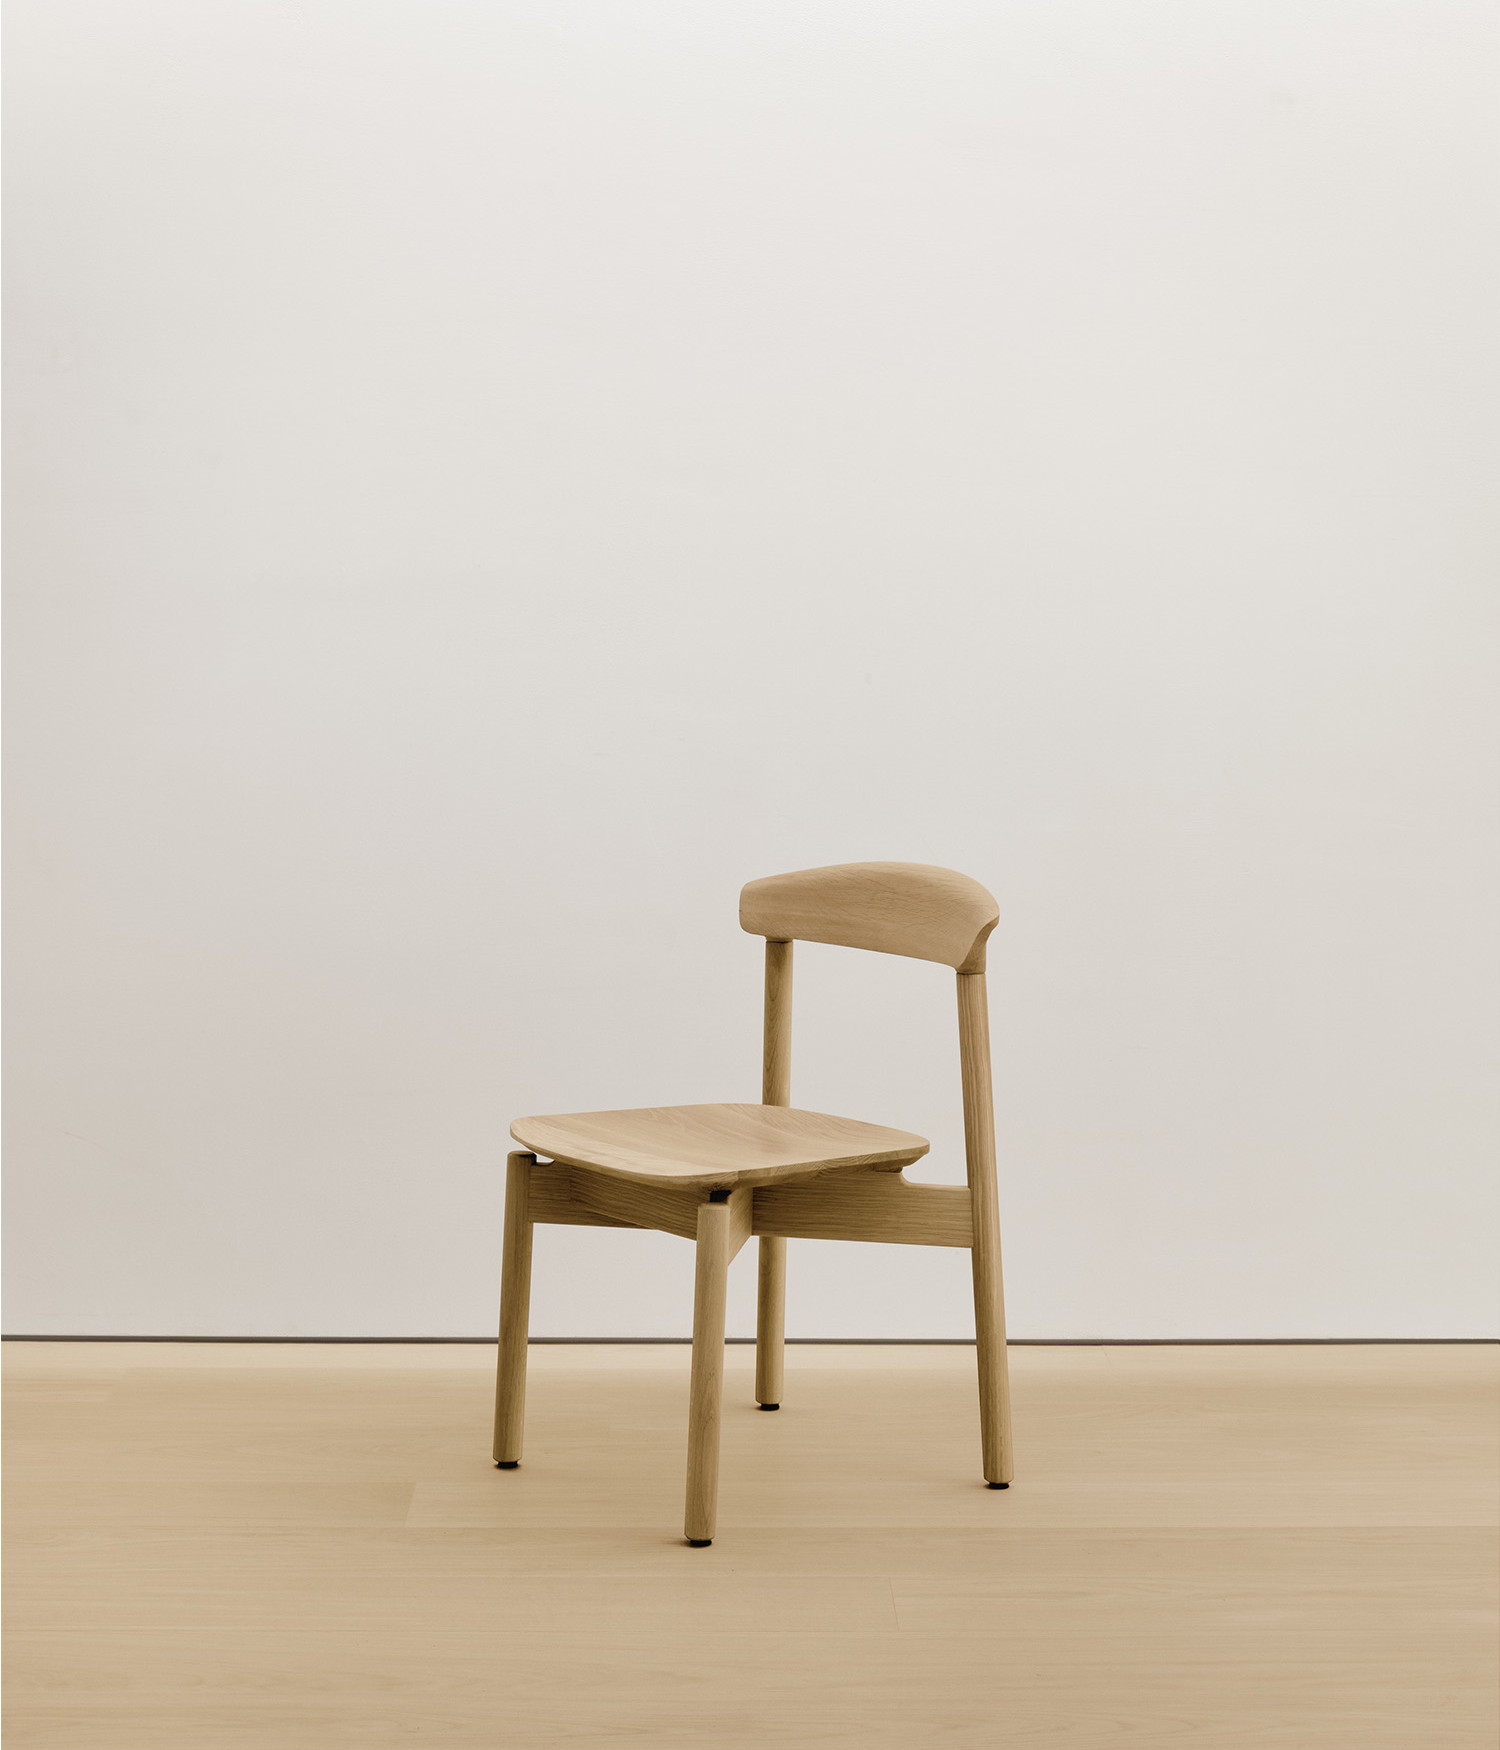  white-oak chair with solid wood seat